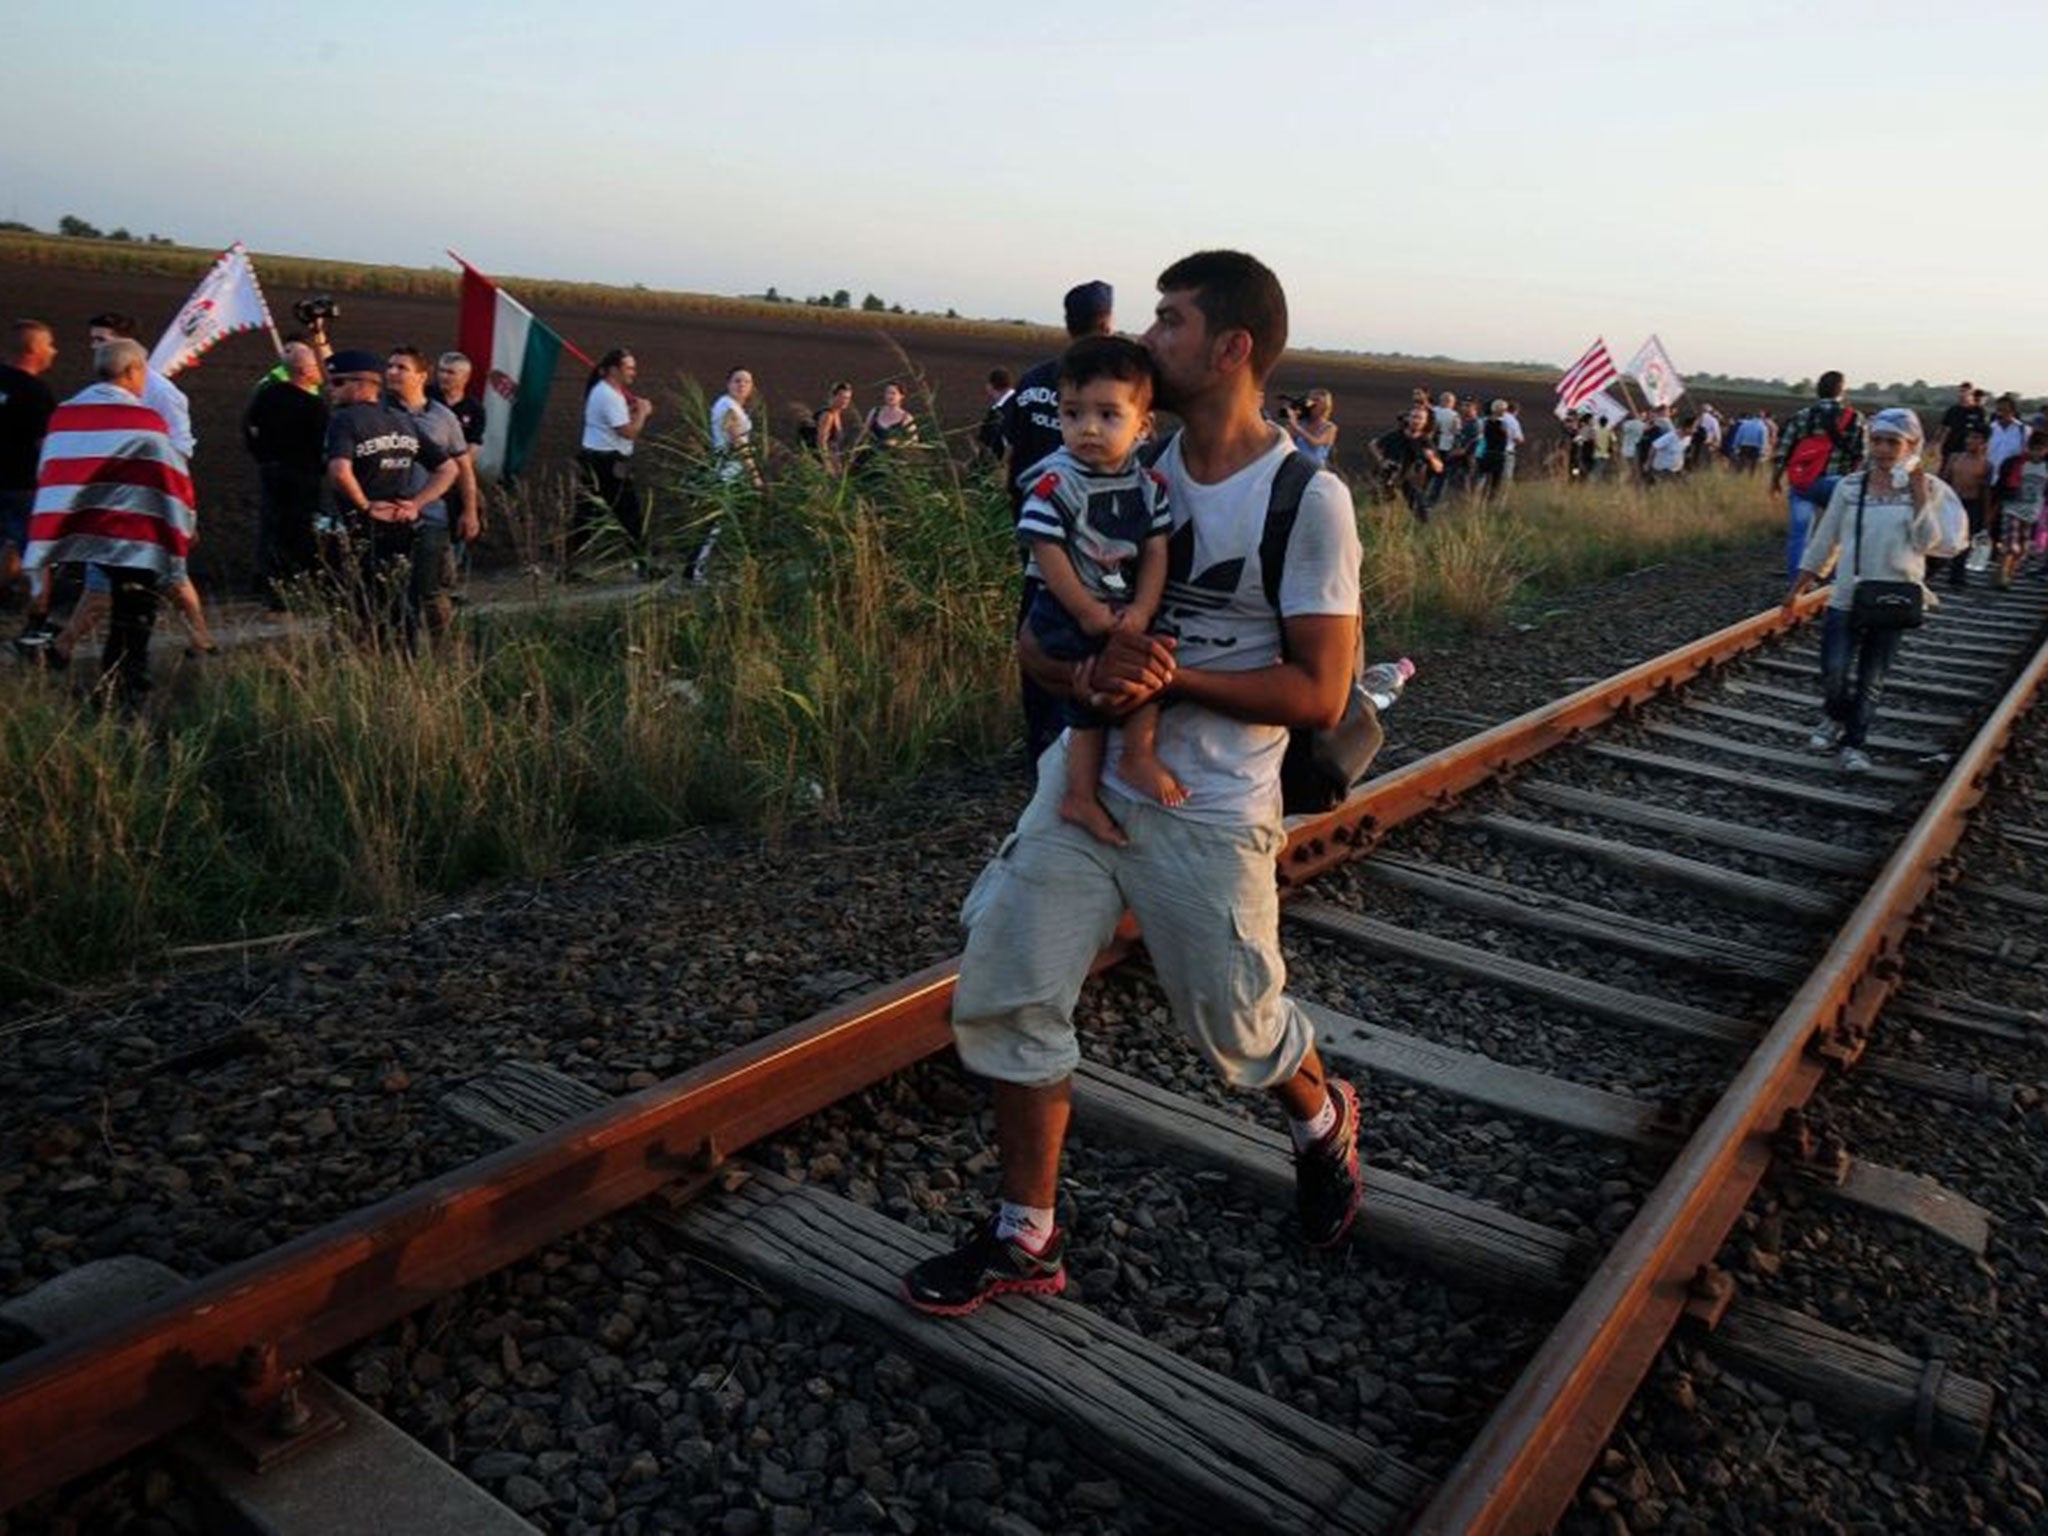 Migrants (R) arrive to Hungary walking between railways while crossing the Serbian border near Roszke village, southern Hungary, on September 2, 2015 as participants of nationalist right-wing party (L) Jobbik's (Better) organized demonstration protest aga